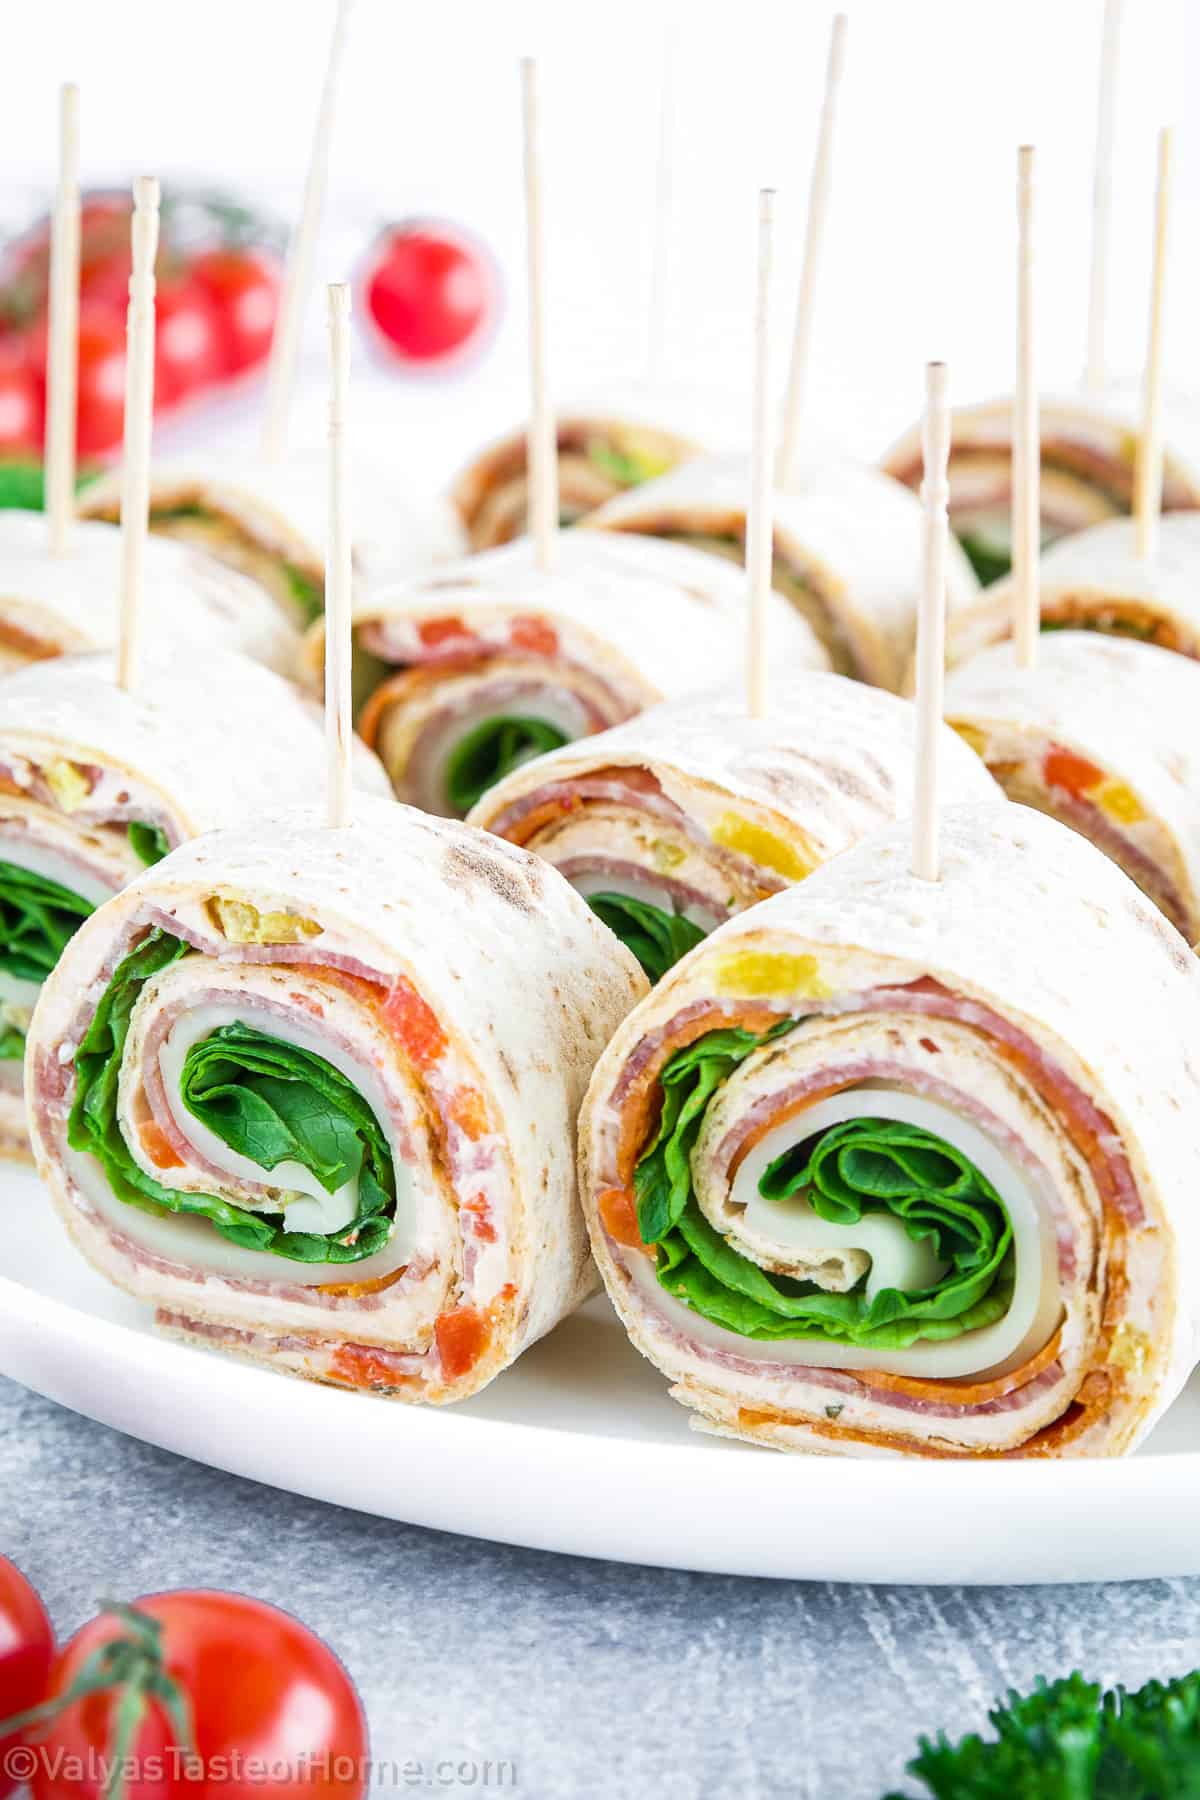 Whether you’re hosting a cocktail party, attending a potluck, or simply craving a snack, Italian pinwheels are guaranteed to be a crowd-pleaser.